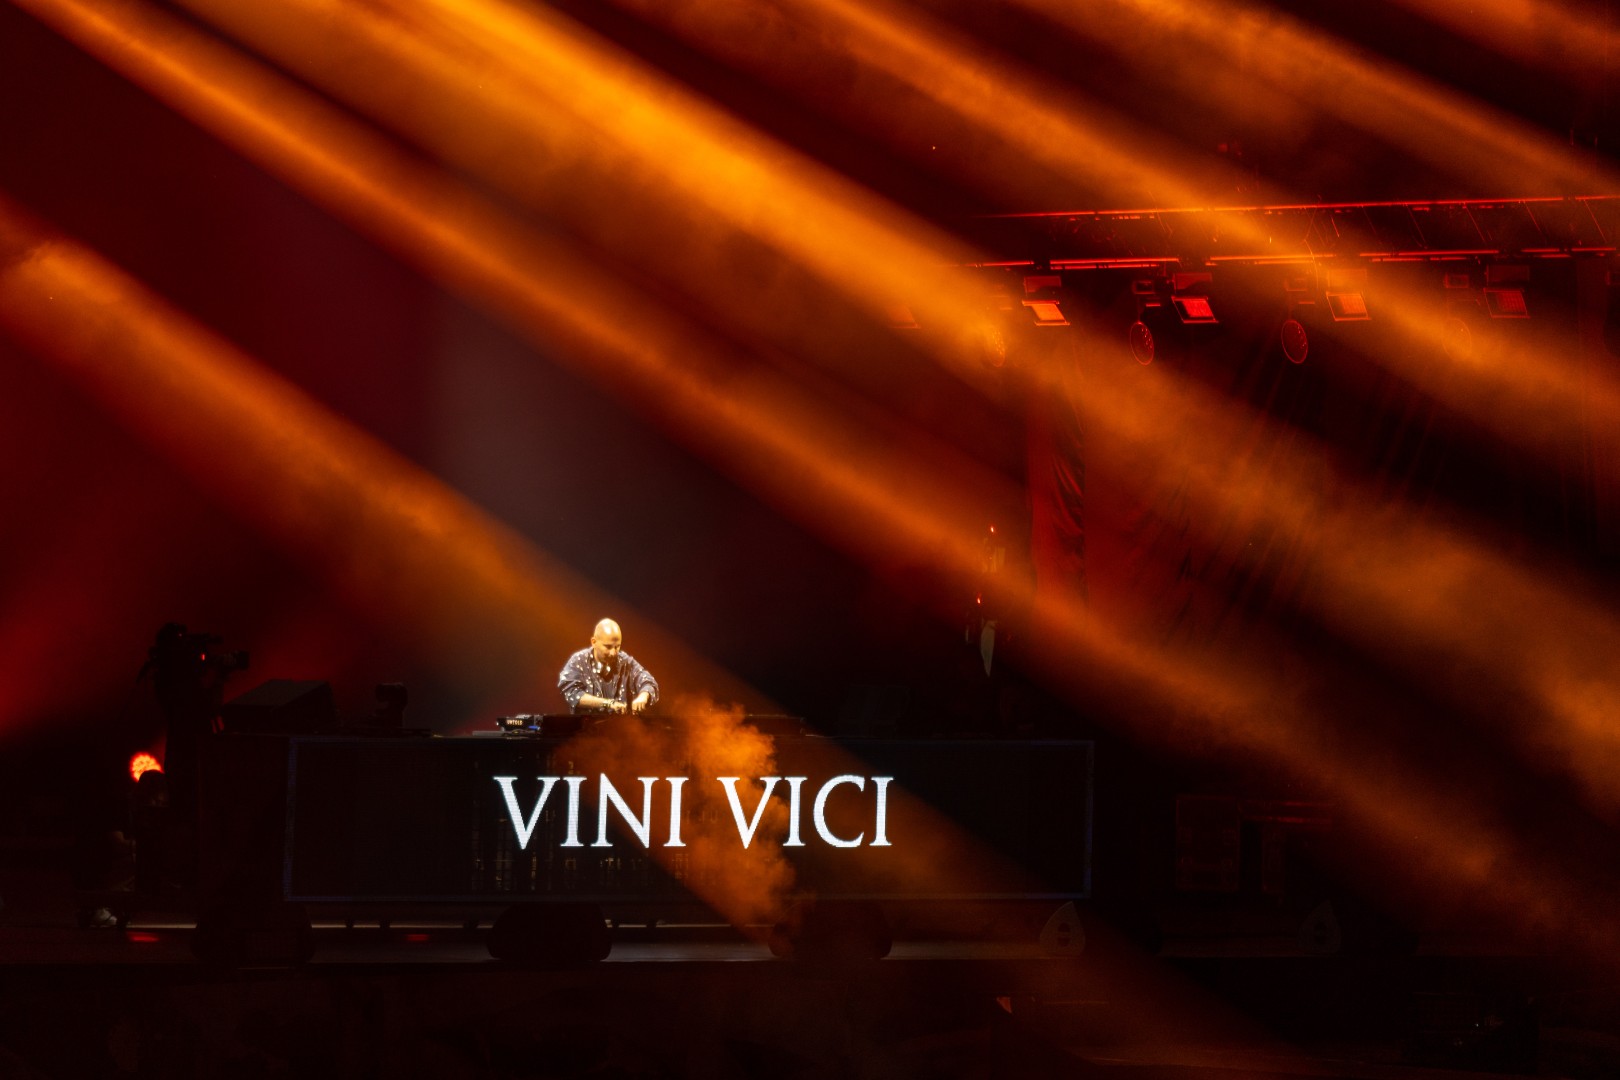 Vini Vici at Cluj Arena in Cluj-Napoca on August 4, 2022 (b06823627d)